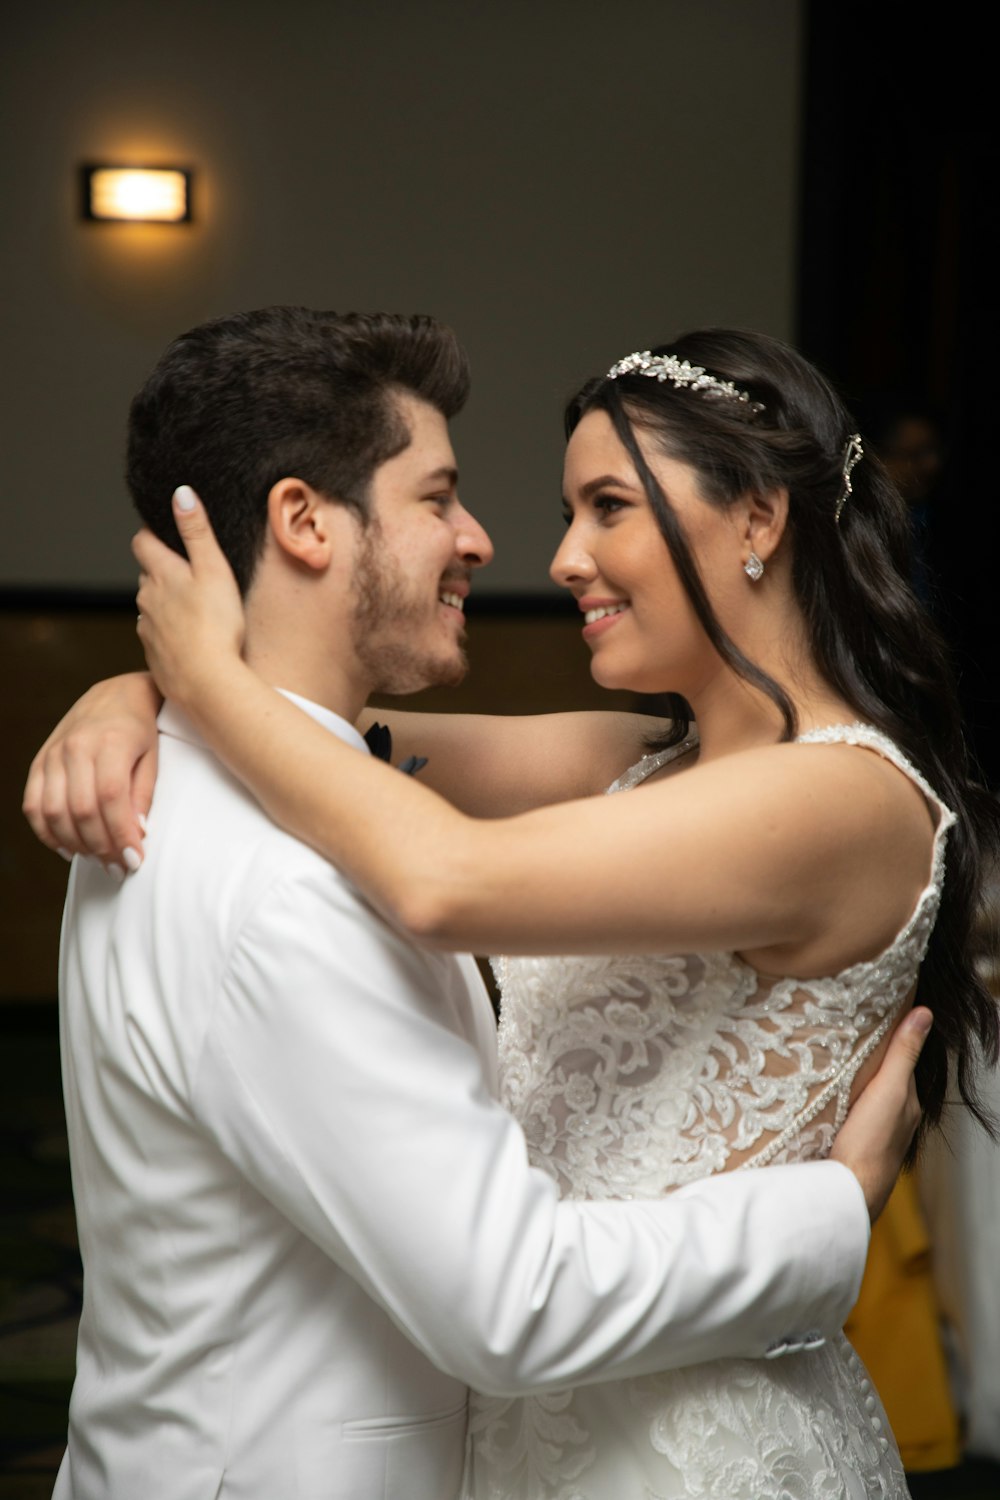 a bride and groom dance together at their wedding reception